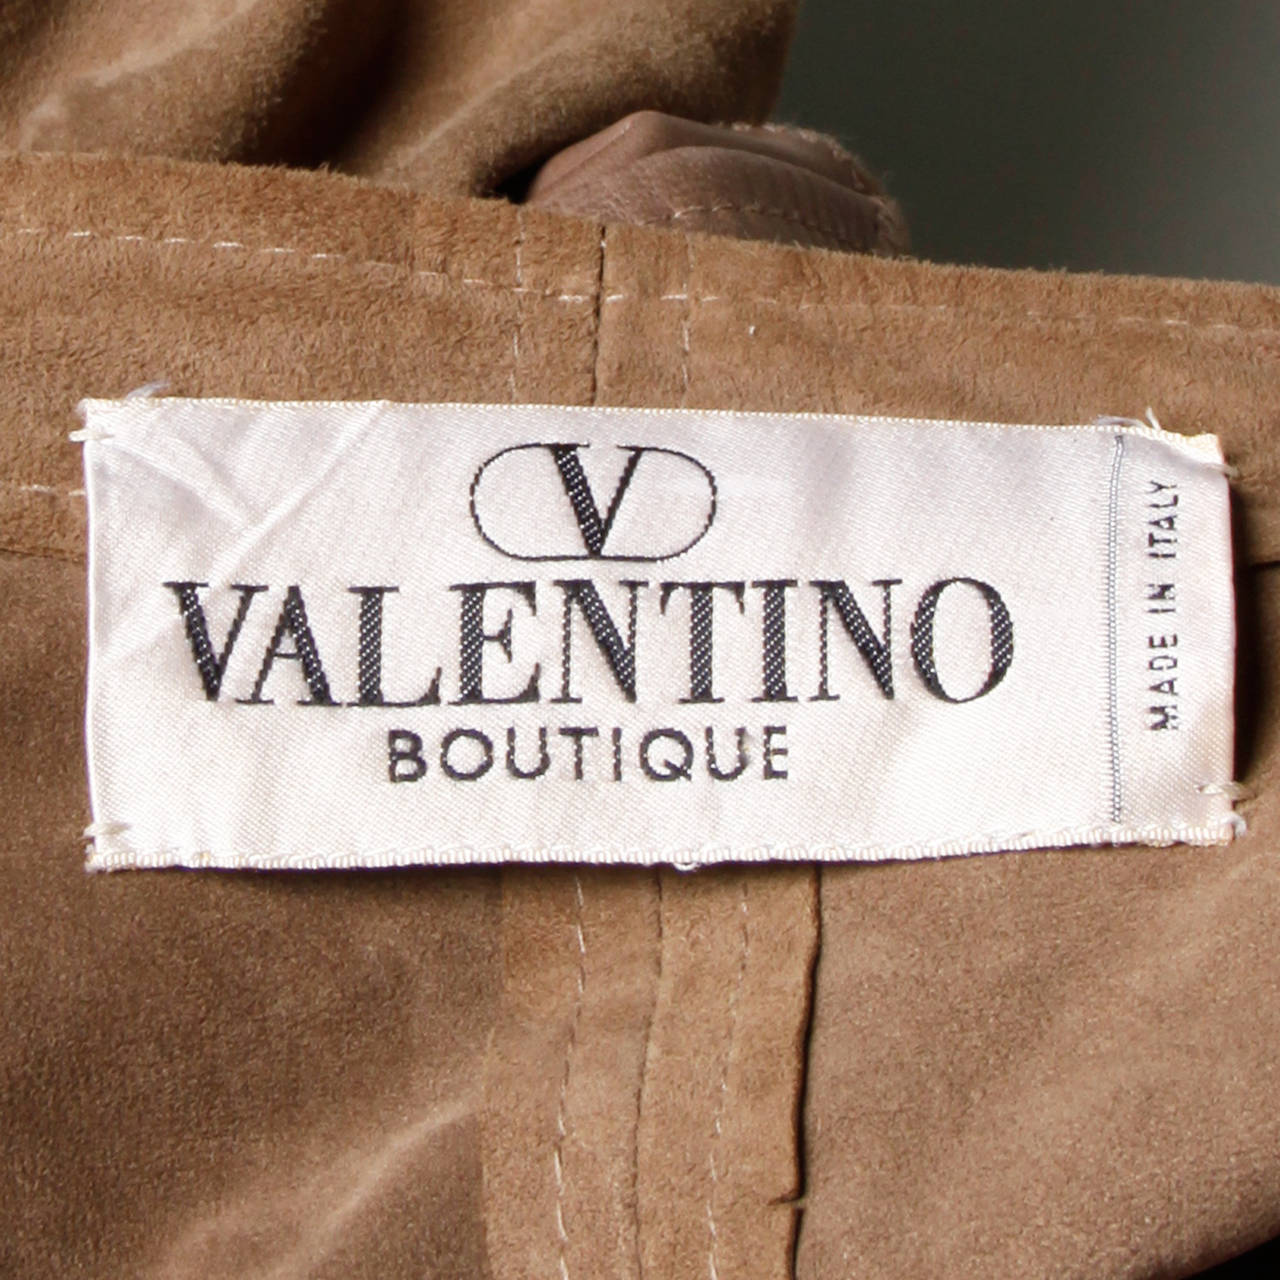 Beautifully made delicate buttery suede leather bomber jacket with smooth leather detailing by Valentino Boutique. Snap closure and rare label. We are offering the matching culottes in another listing!

Details:

Unlined 
Front